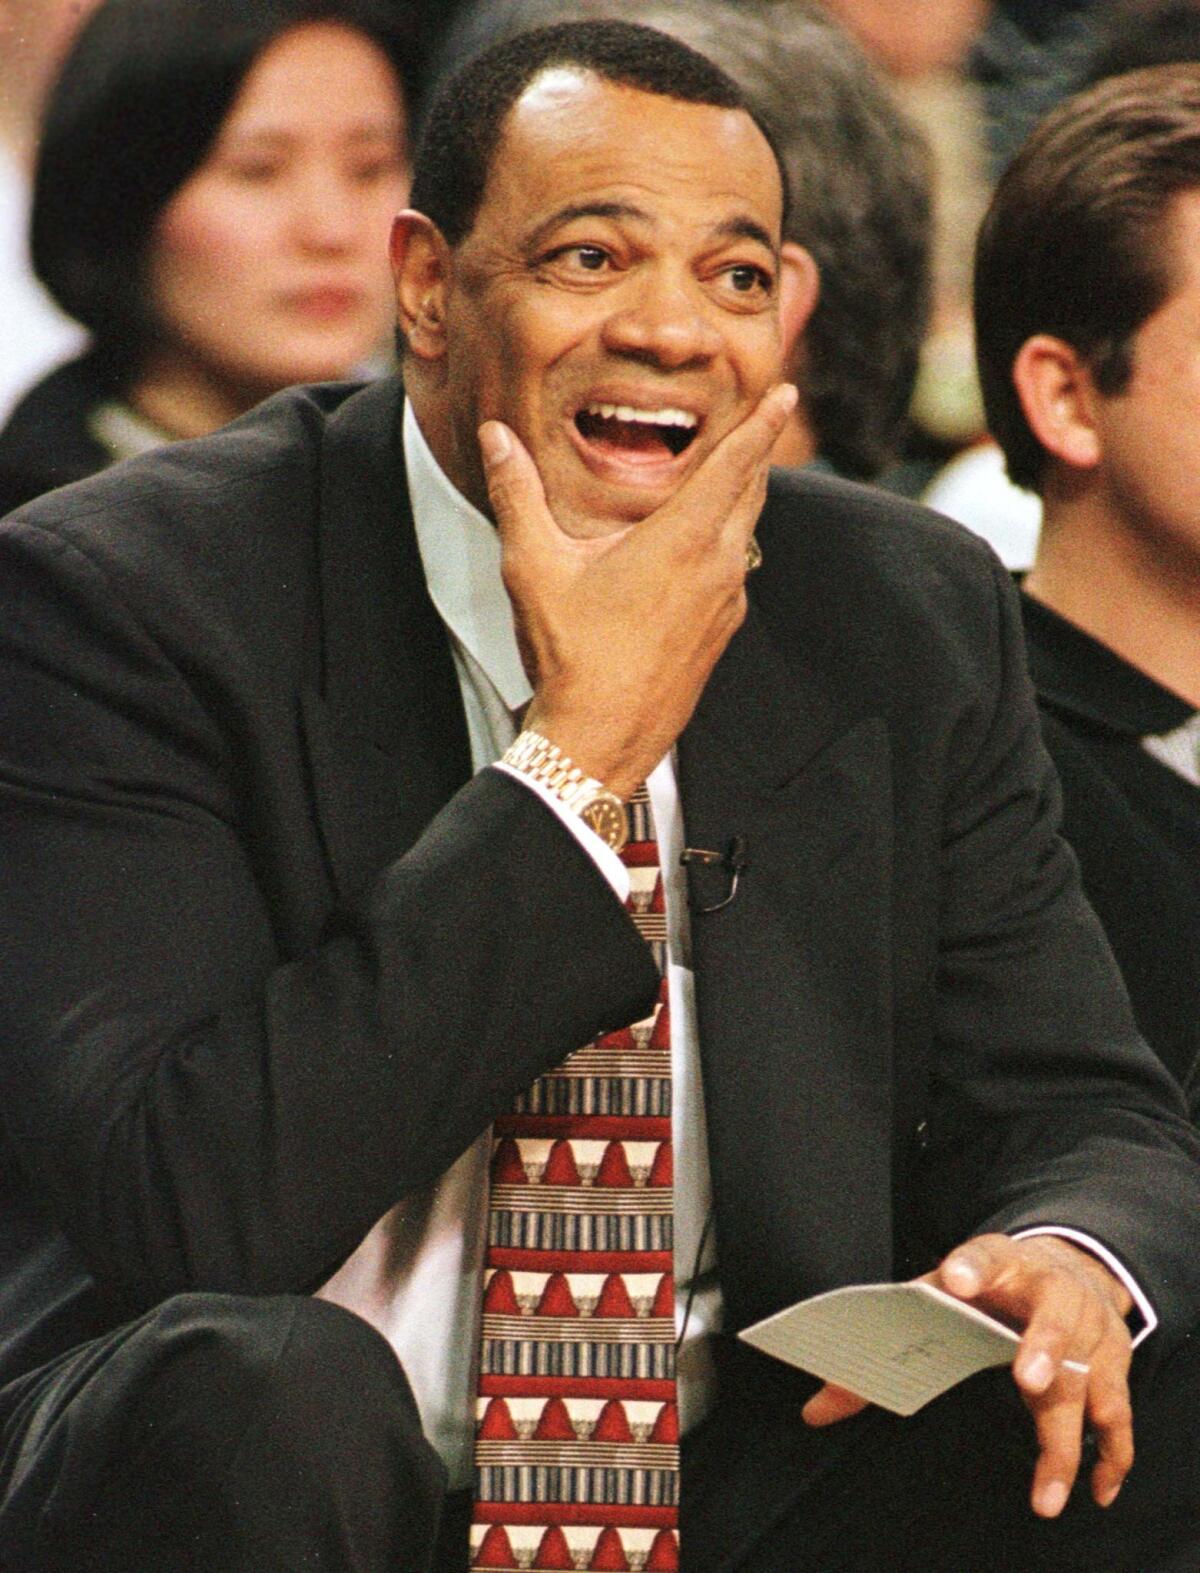 Lionel Hollins during his coaching tenure with the Vancouver Grizzlies.